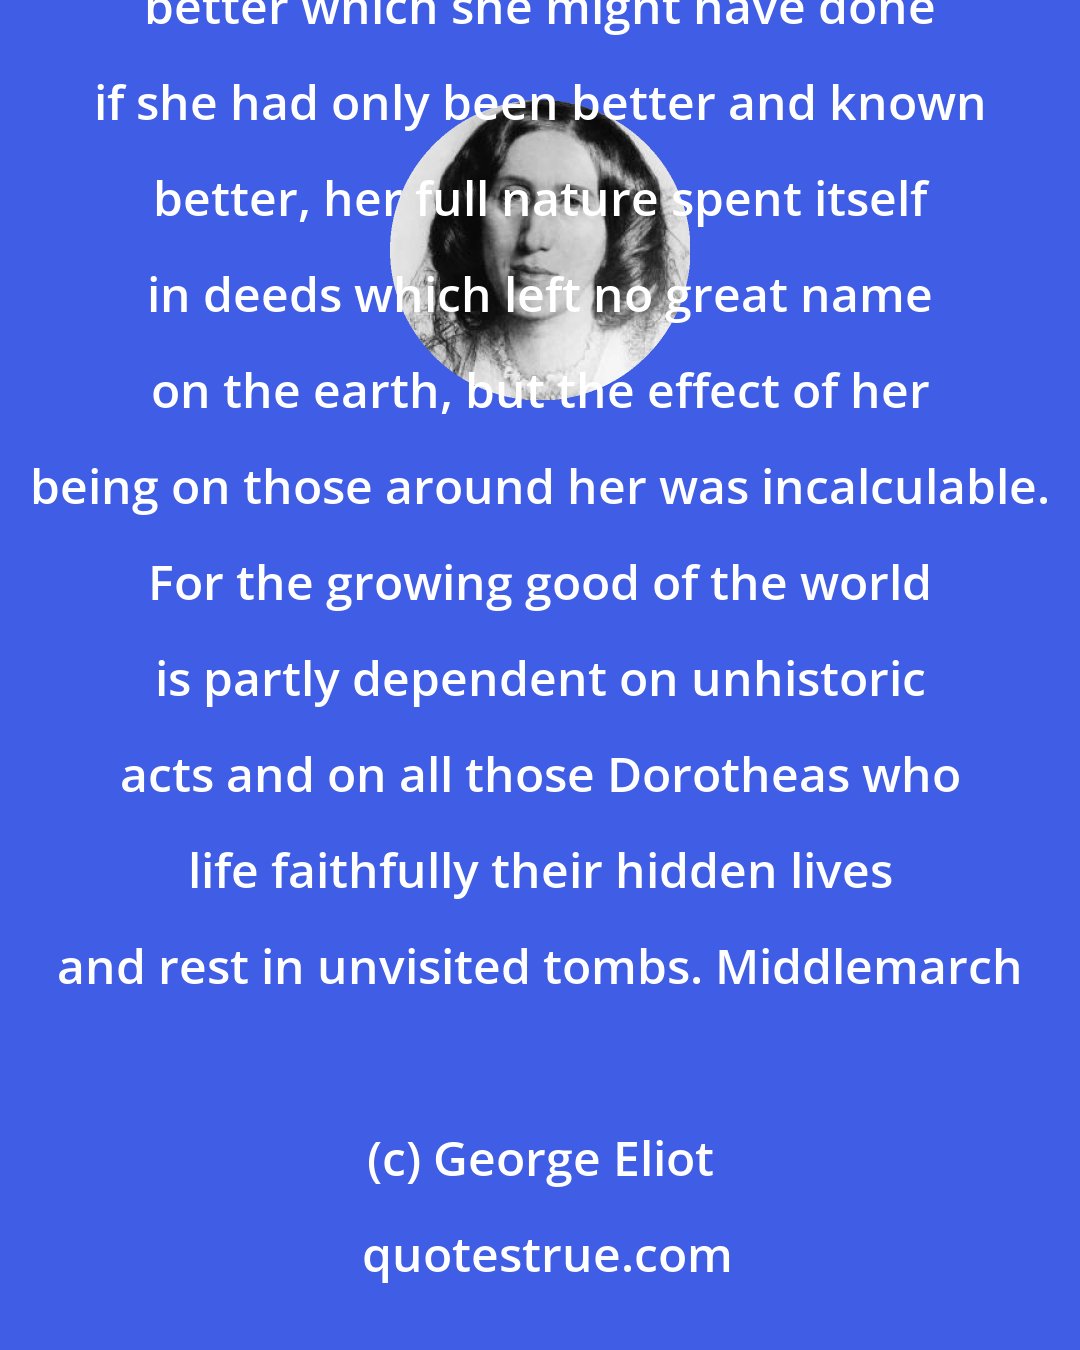 George Eliot: And Dorothea..she had no dreams of being praised above other women. Feeling that there was always something better which she might have done if she had only been better and known better, her full nature spent itself in deeds which left no great name on the earth, but the effect of her being on those around her was incalculable. For the growing good of the world is partly dependent on unhistoric acts and on all those Dorotheas who life faithfully their hidden lives and rest in unvisited tombs. Middlemarch